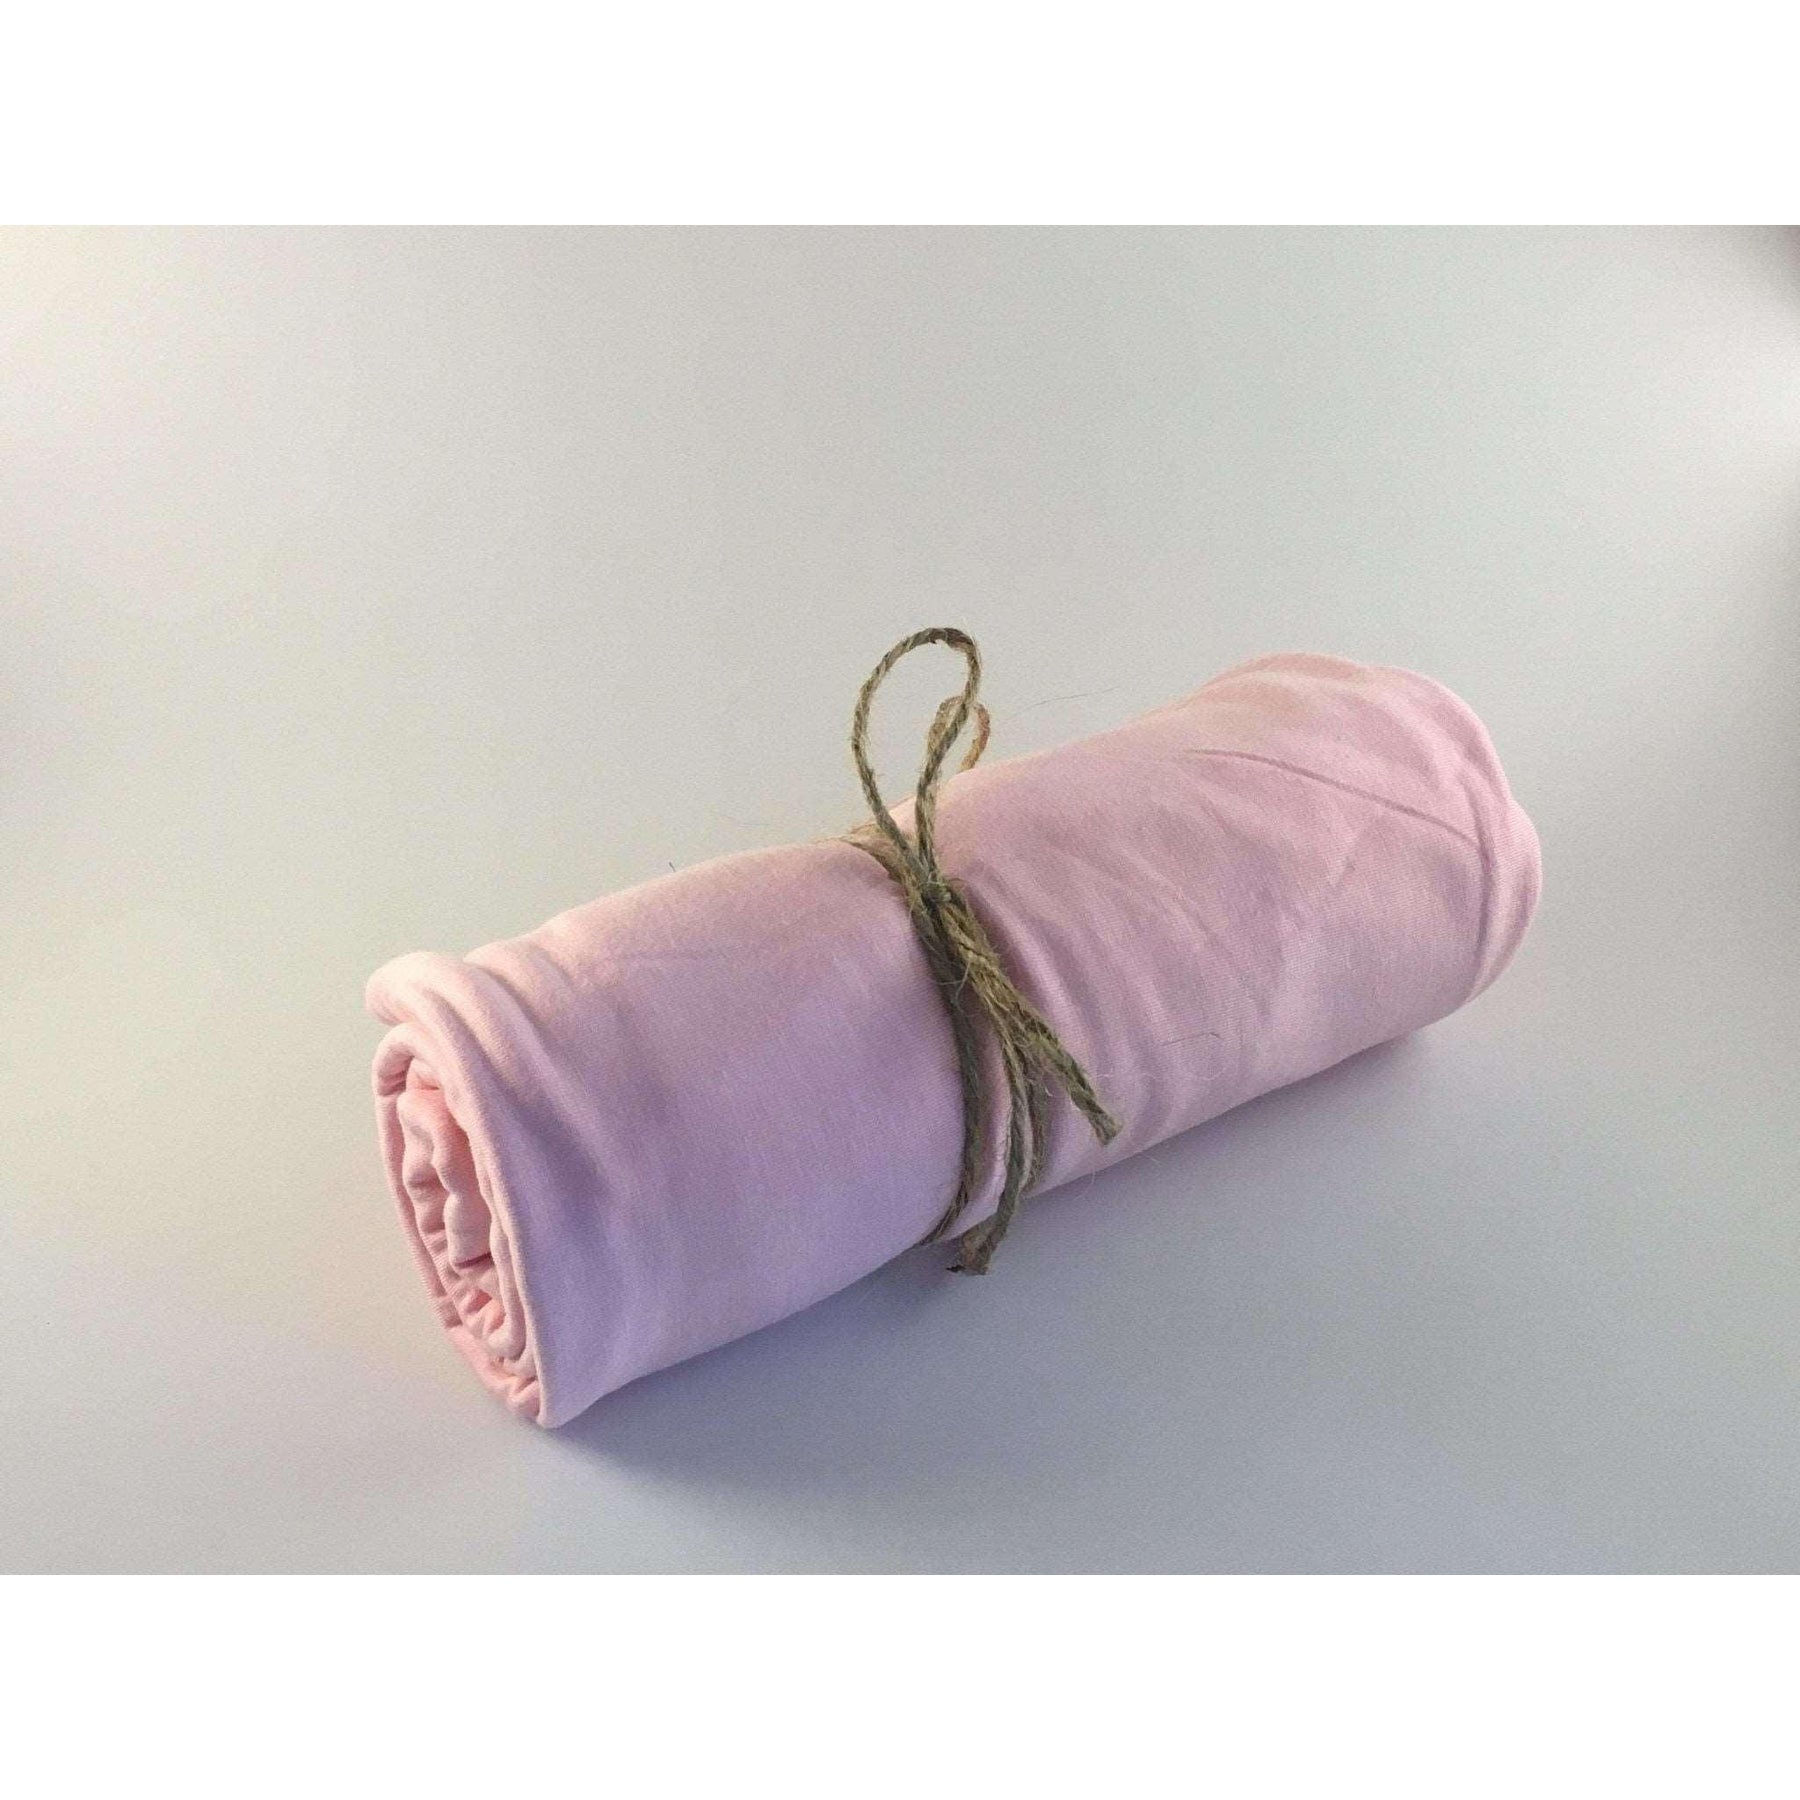 Swaddle Buds- Breathable Stretchy Wraps- Pink - Lavender Life Company